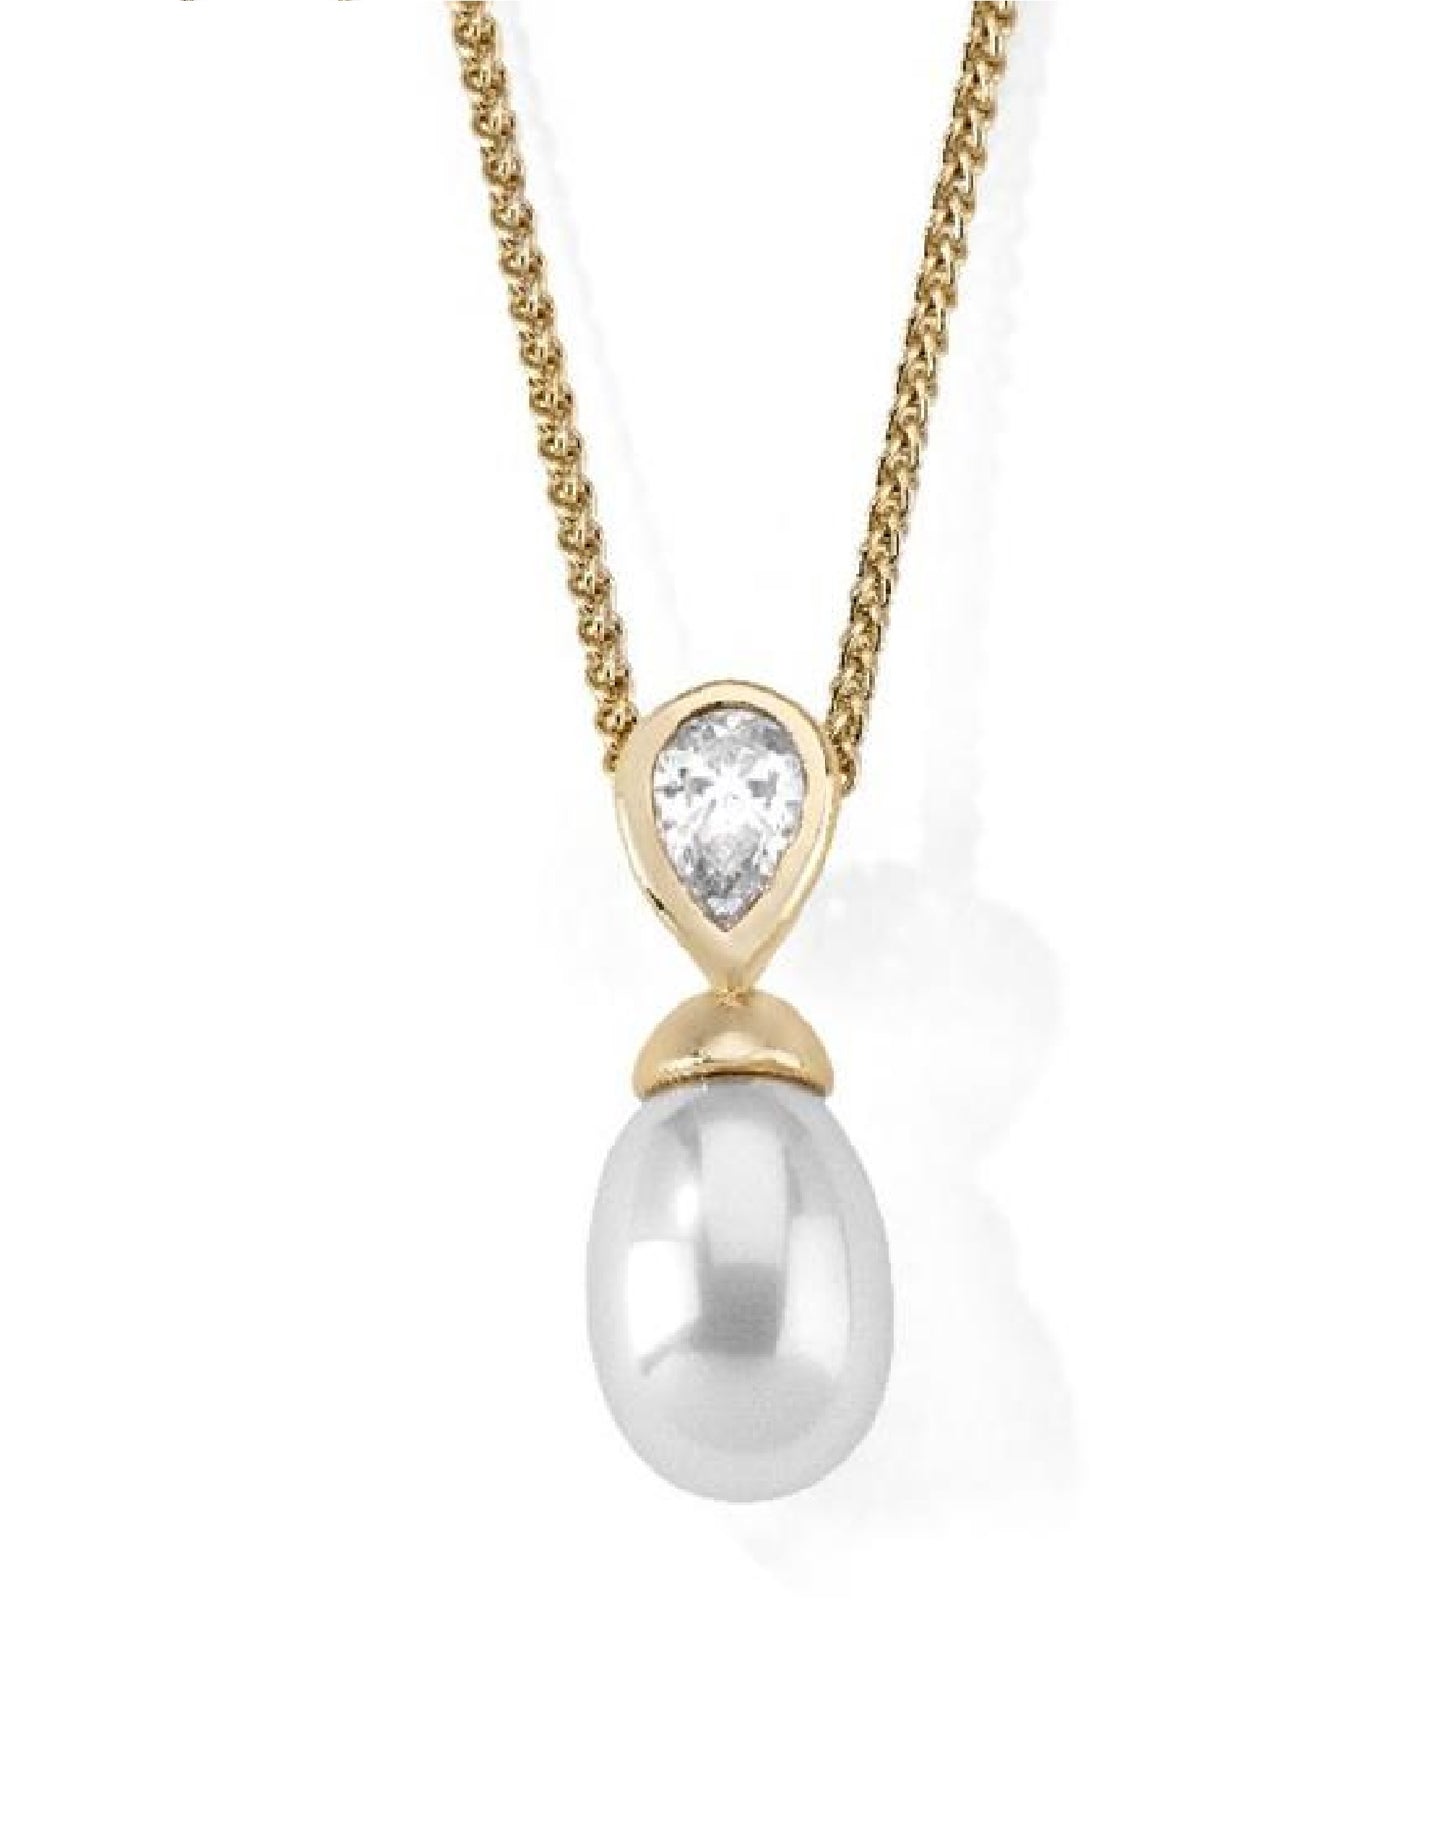 Majorica 12268.01.1.N42.000.1 Majorica Yellow Gold Tone Auva Pearl Necklace Necklaces